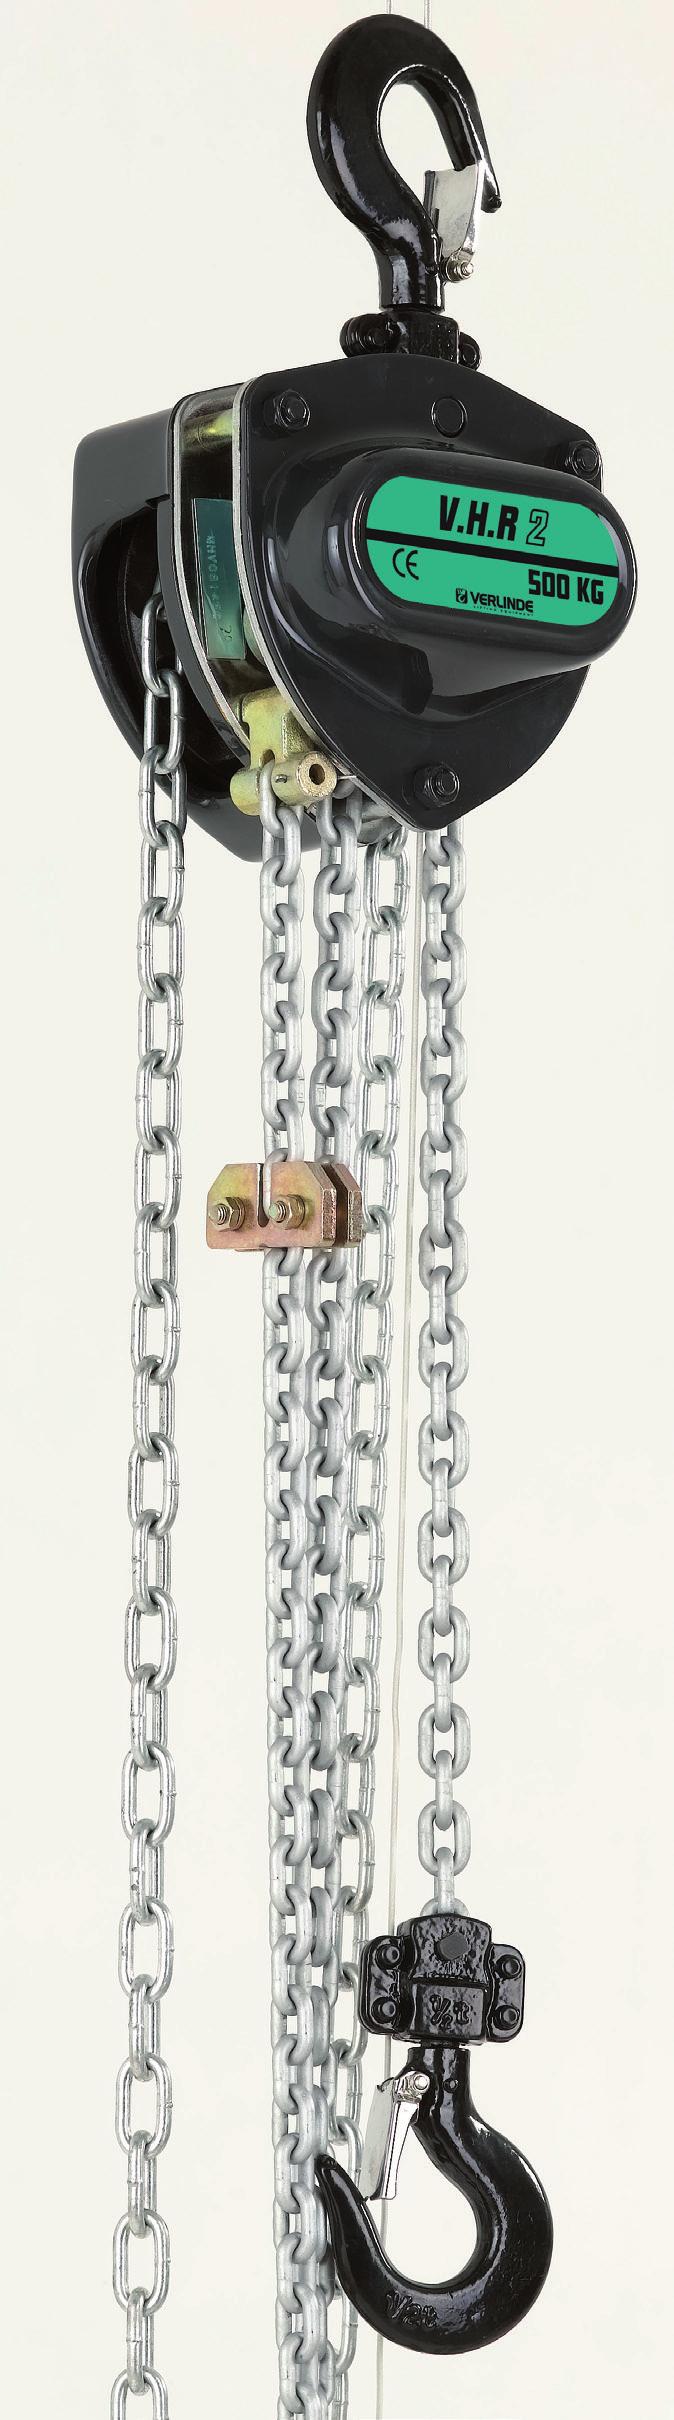 > High resistance category 80 steel alloy lifting chain with galvanised finish ensuring corrosion resistance.